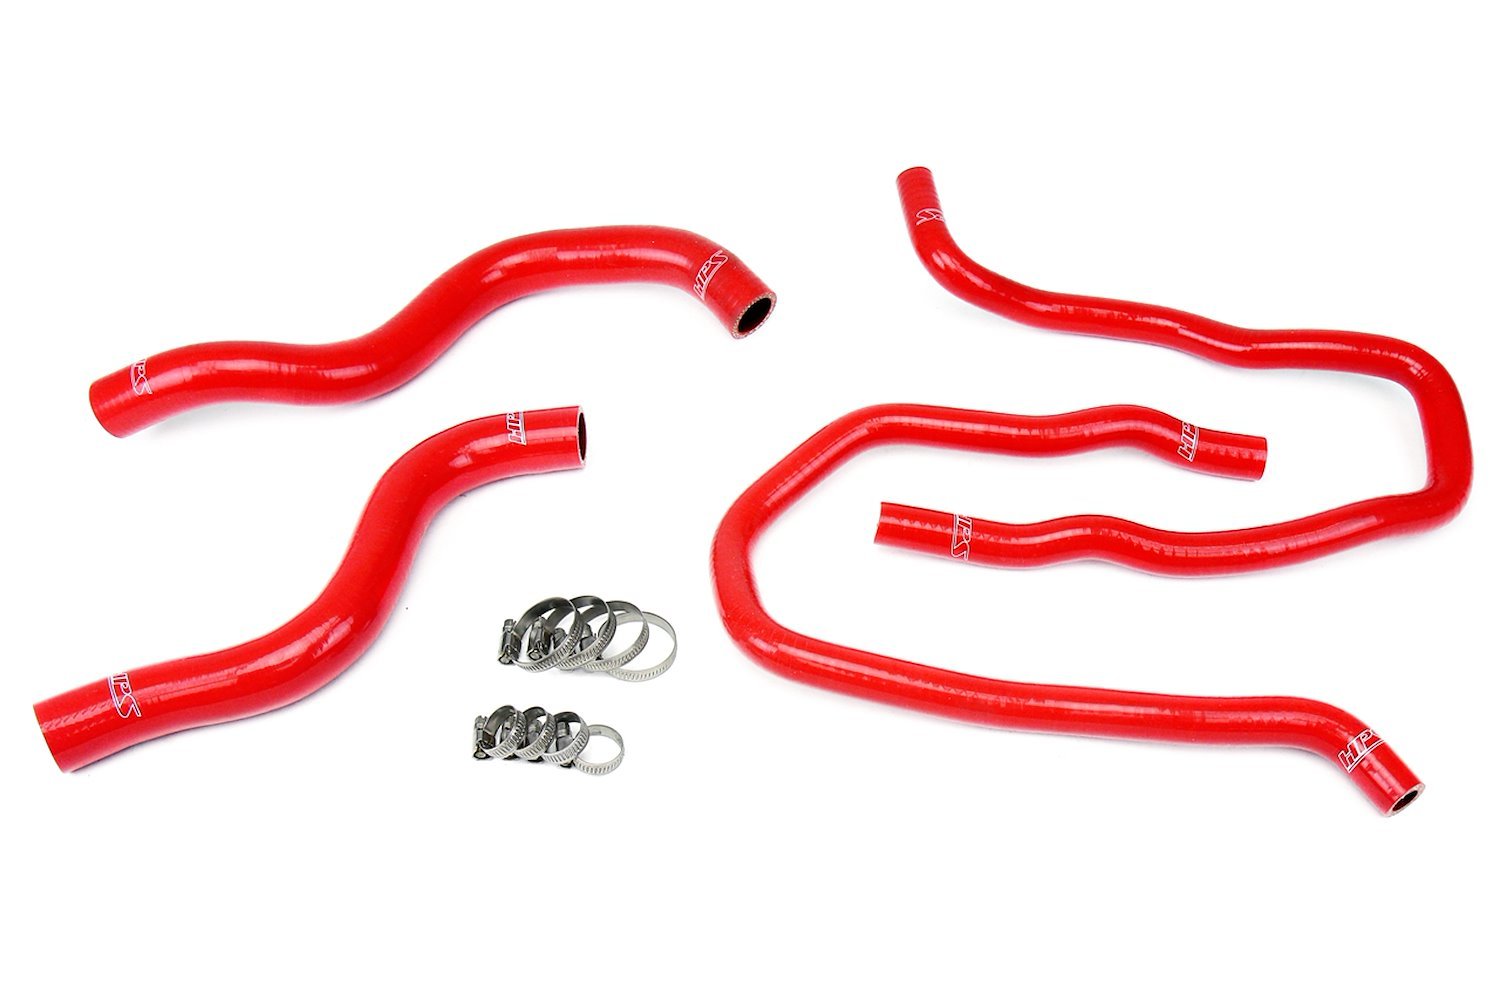 57-1387-RED Coolant Hose Kit, High-Temp 3-Ply Reinforced Silicone, Replace Rubber Radiator Heater Coolant Hoses